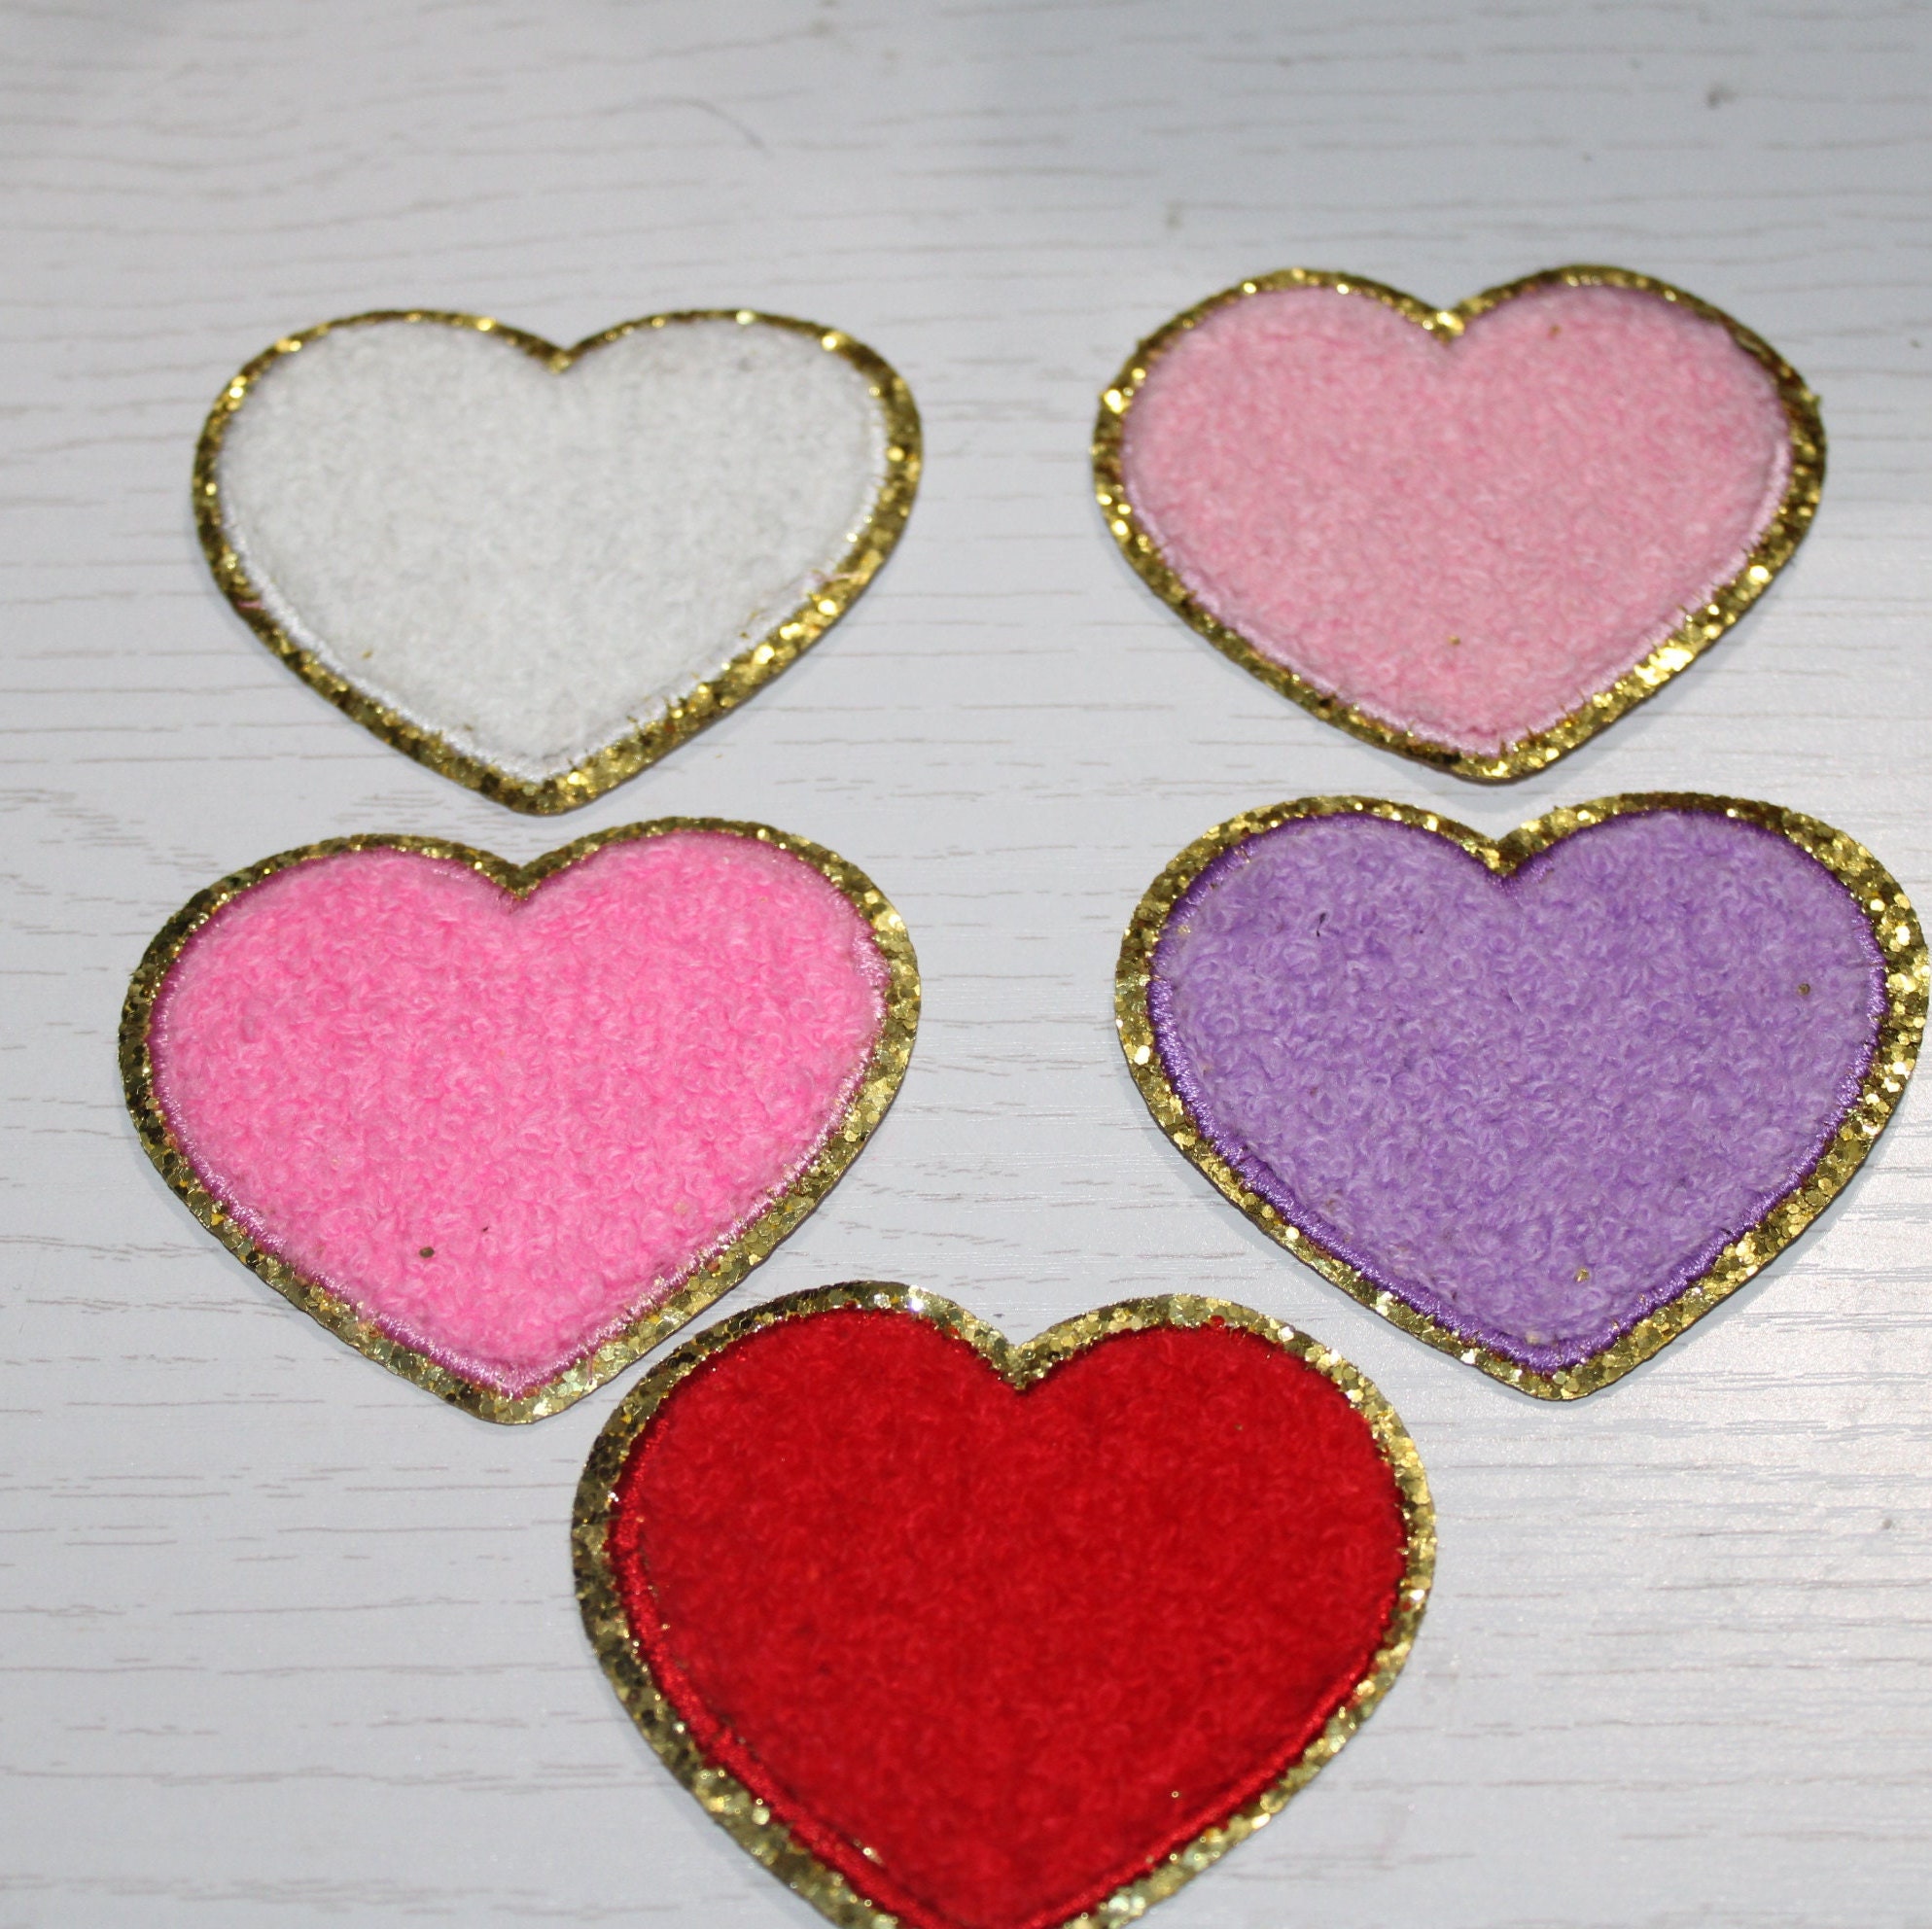 Mini Iron On Heart Patches, 25 Colors for Sewing, DIY Crafts (1 x 0.8 in,  50 Pieces), PACK - Kroger